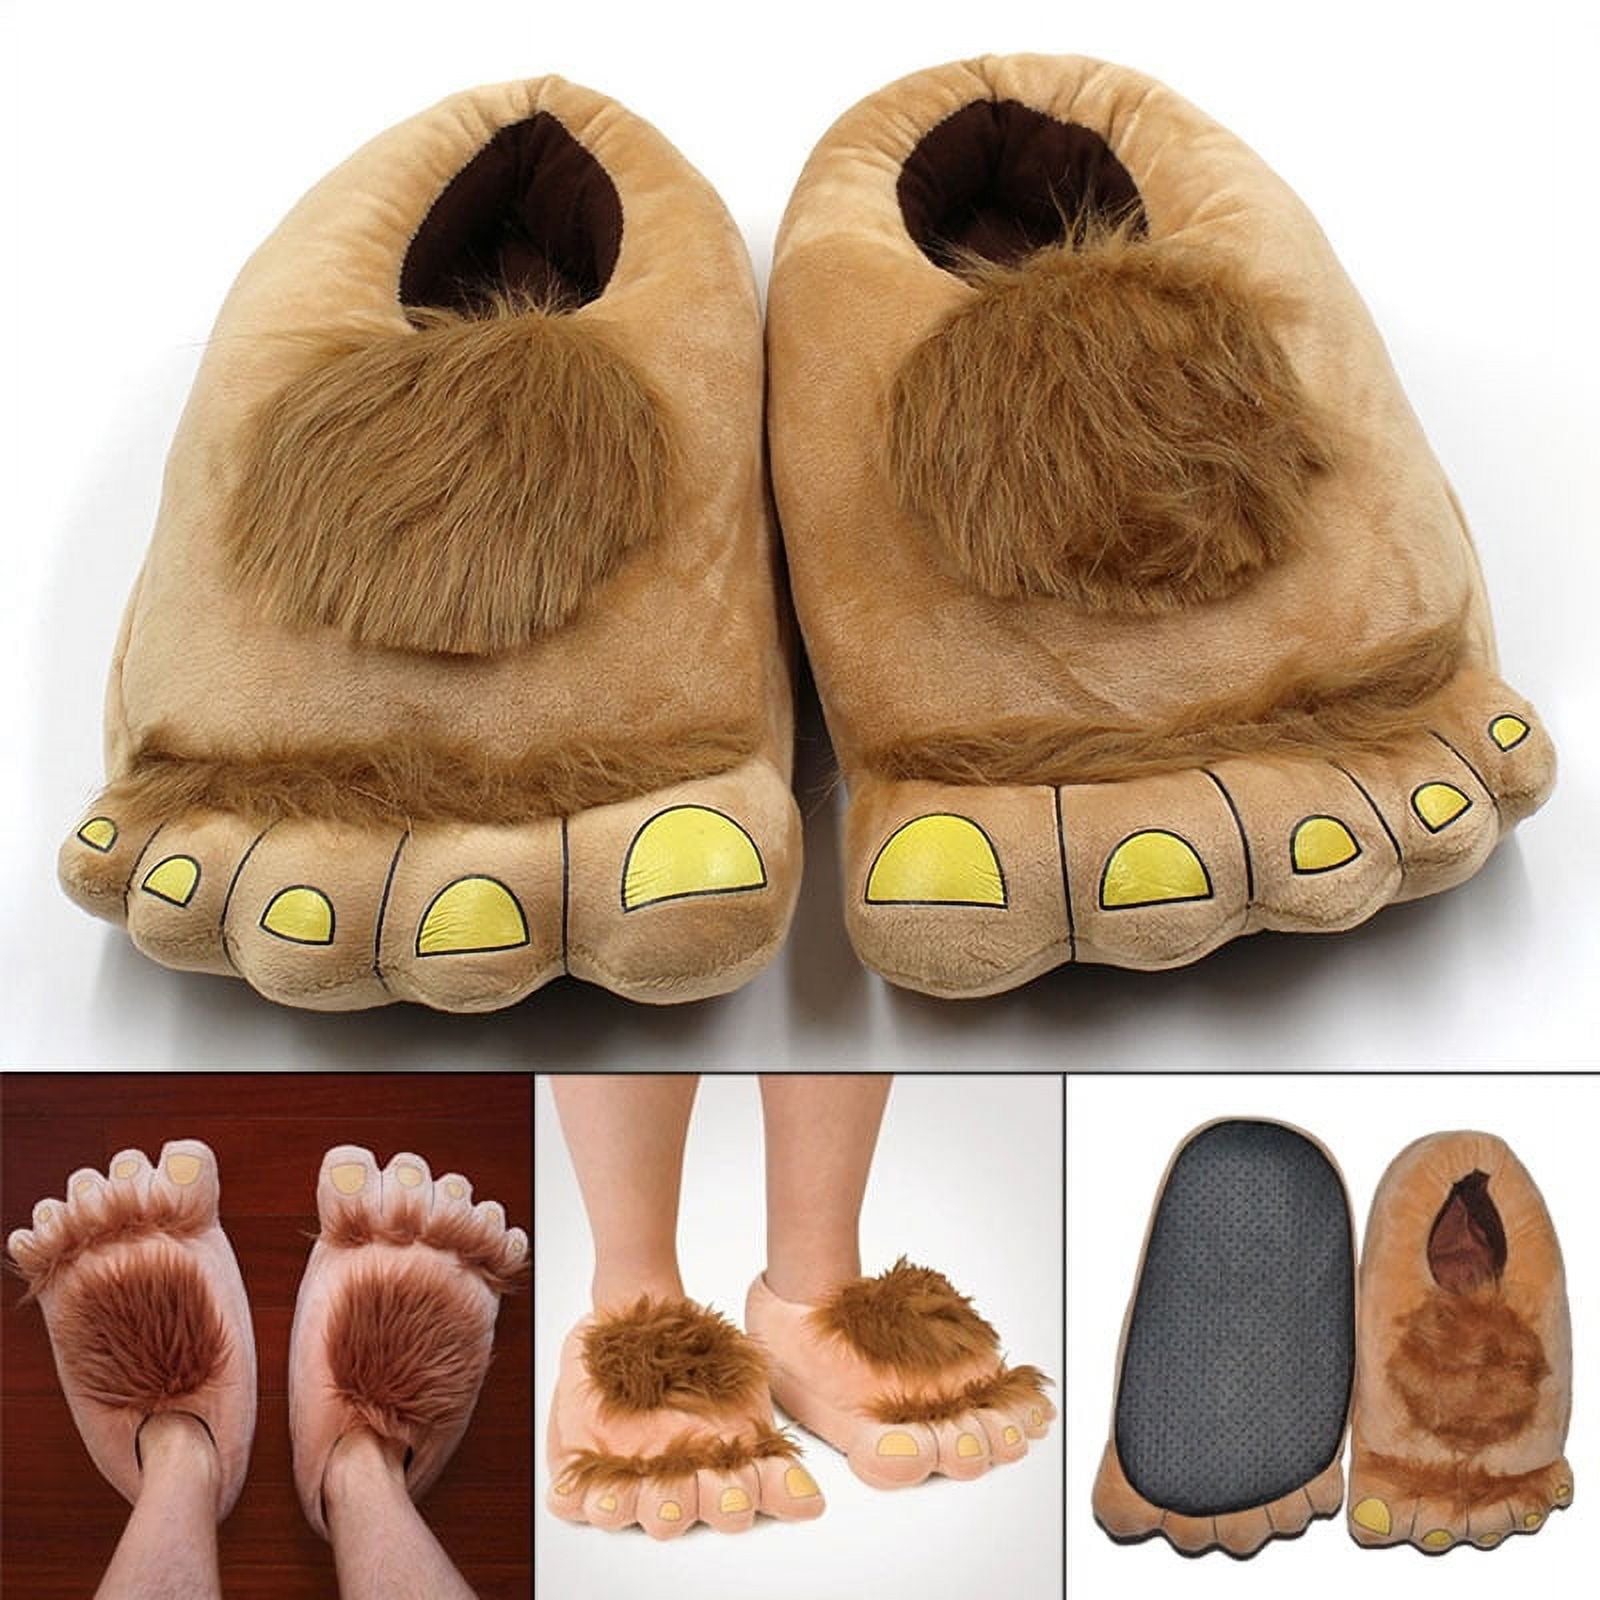 Furry Warm Slippers Big Hairy Unisex Savage Hobbit Feet Plush Home Slippers Hallo ween Shoes New b0cdcb4b beaa 4519 b6c6 1ec05a105fe9.bfc53b87a3aebe75bf5a985267a6c9bf